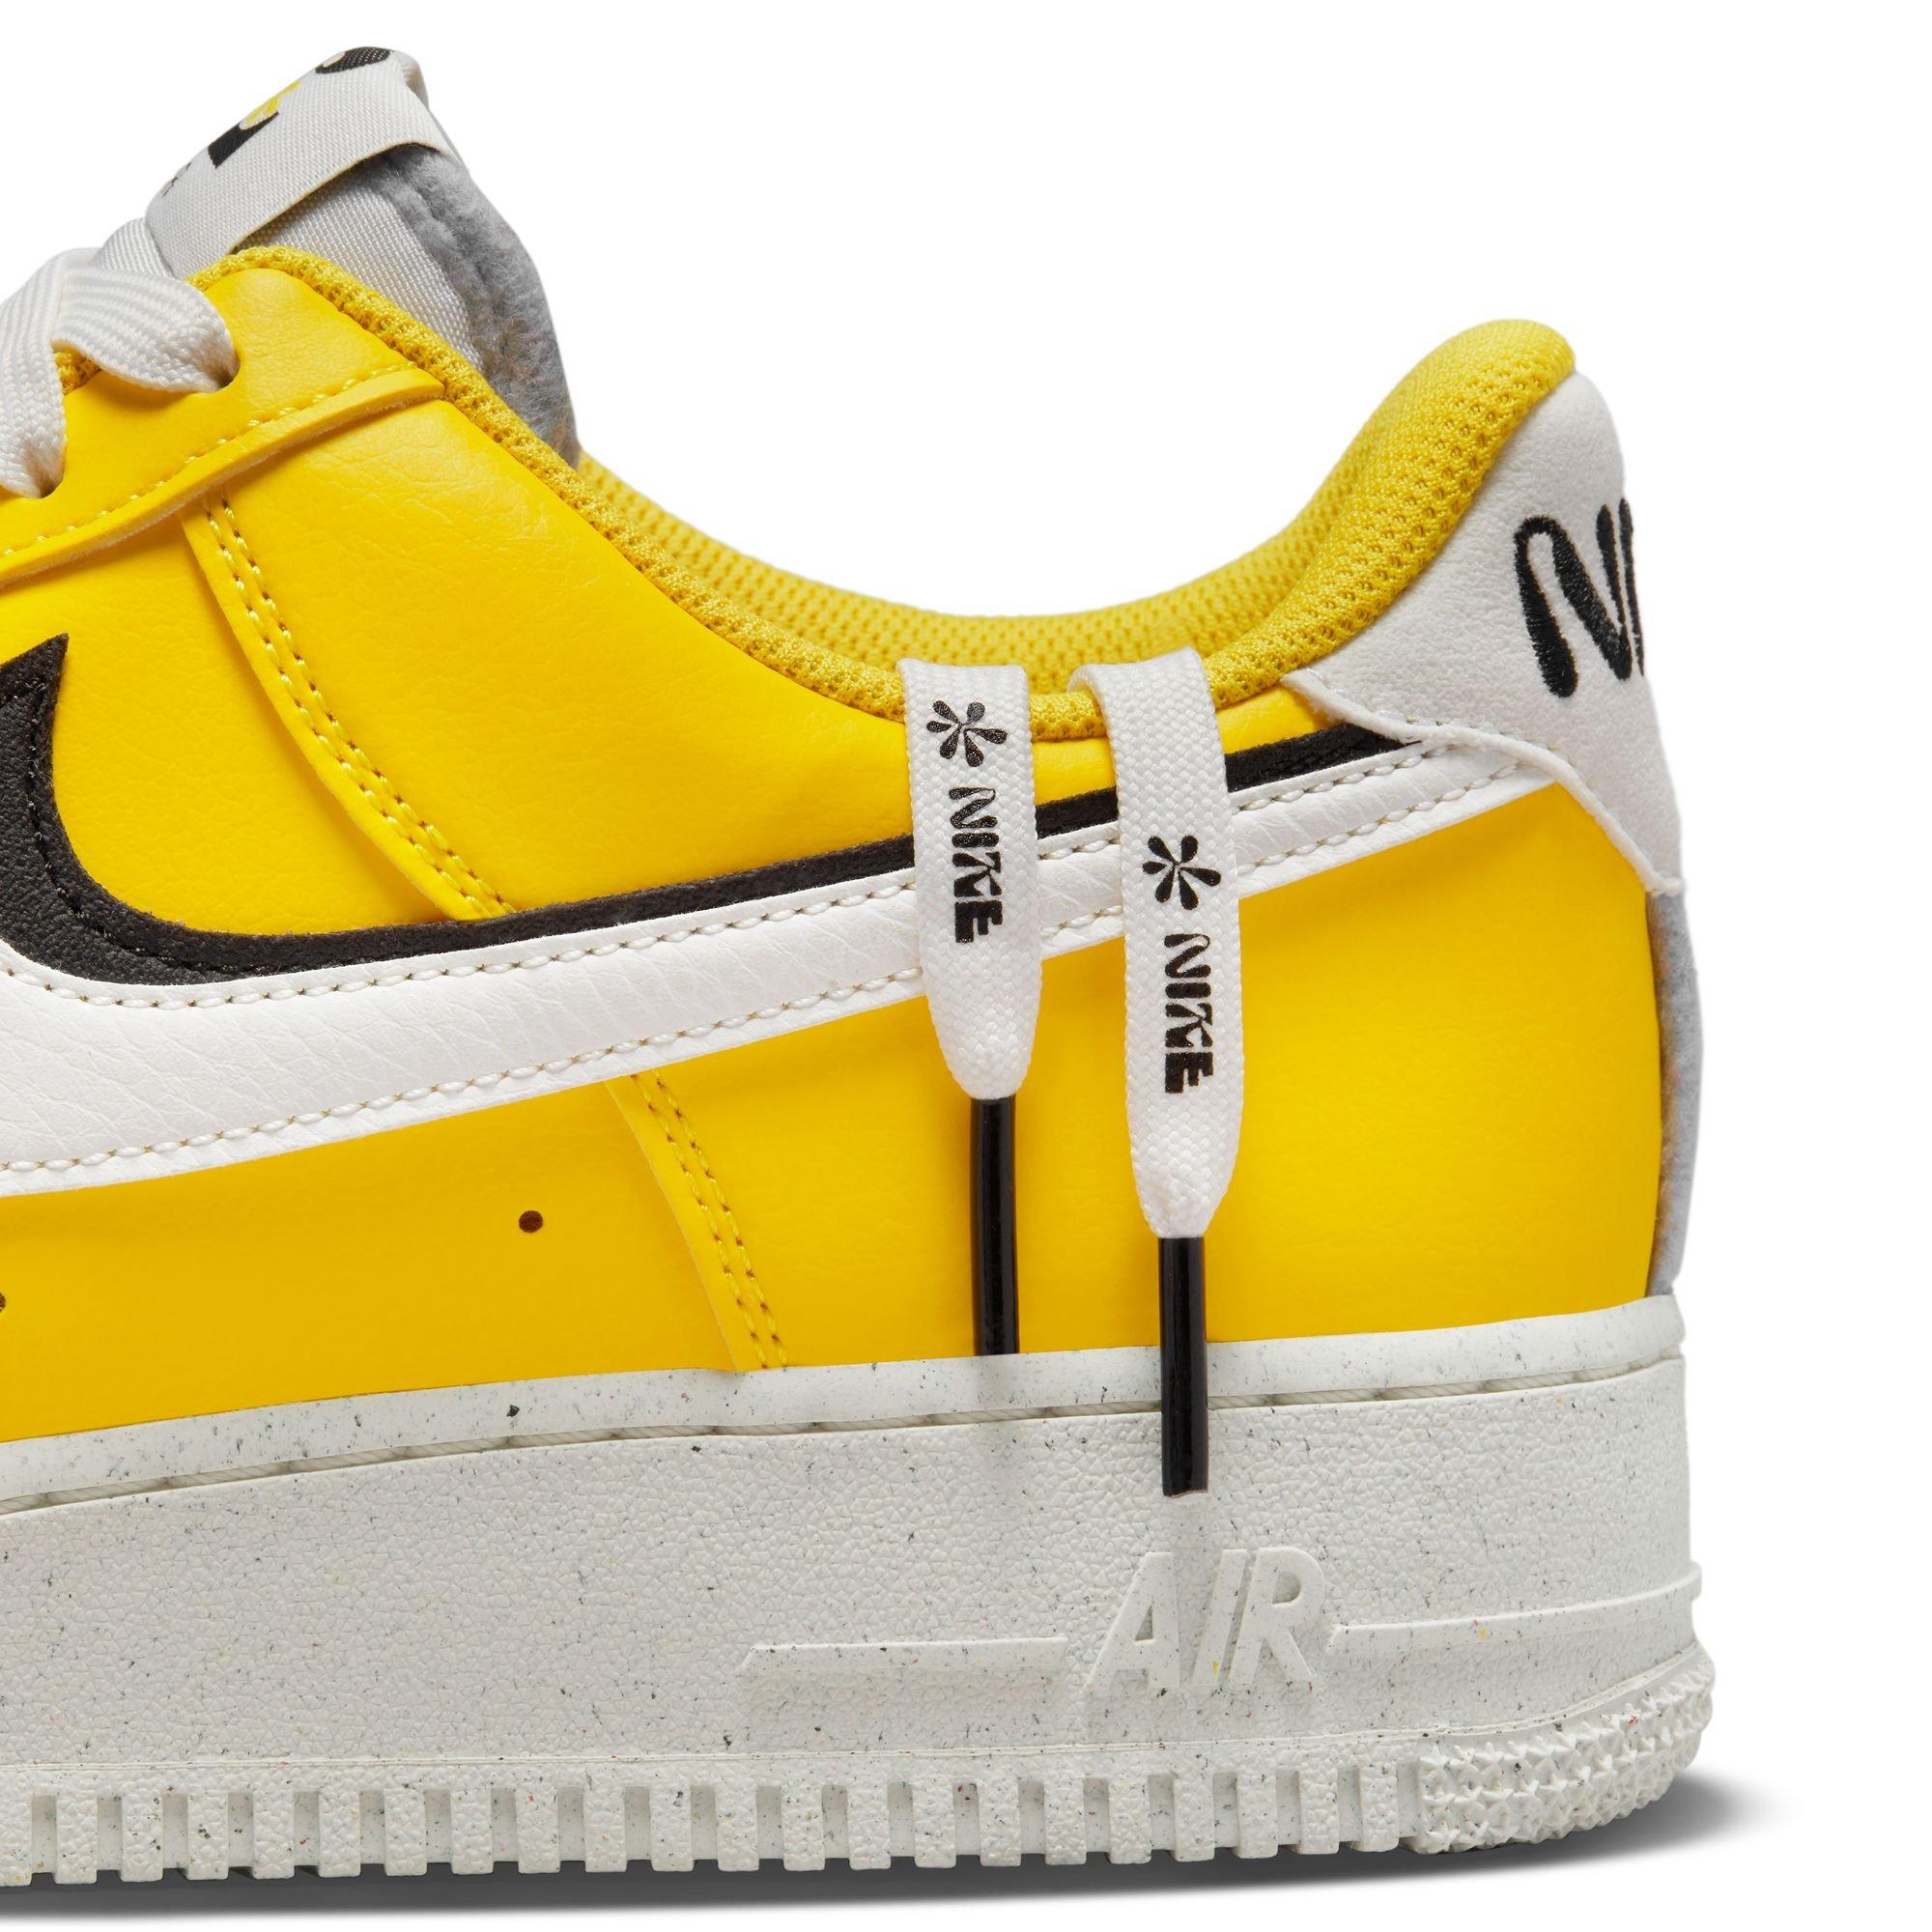 Nike Air Force 1 07 LV8 Black Yellow JD Exclusive, Where To Buy